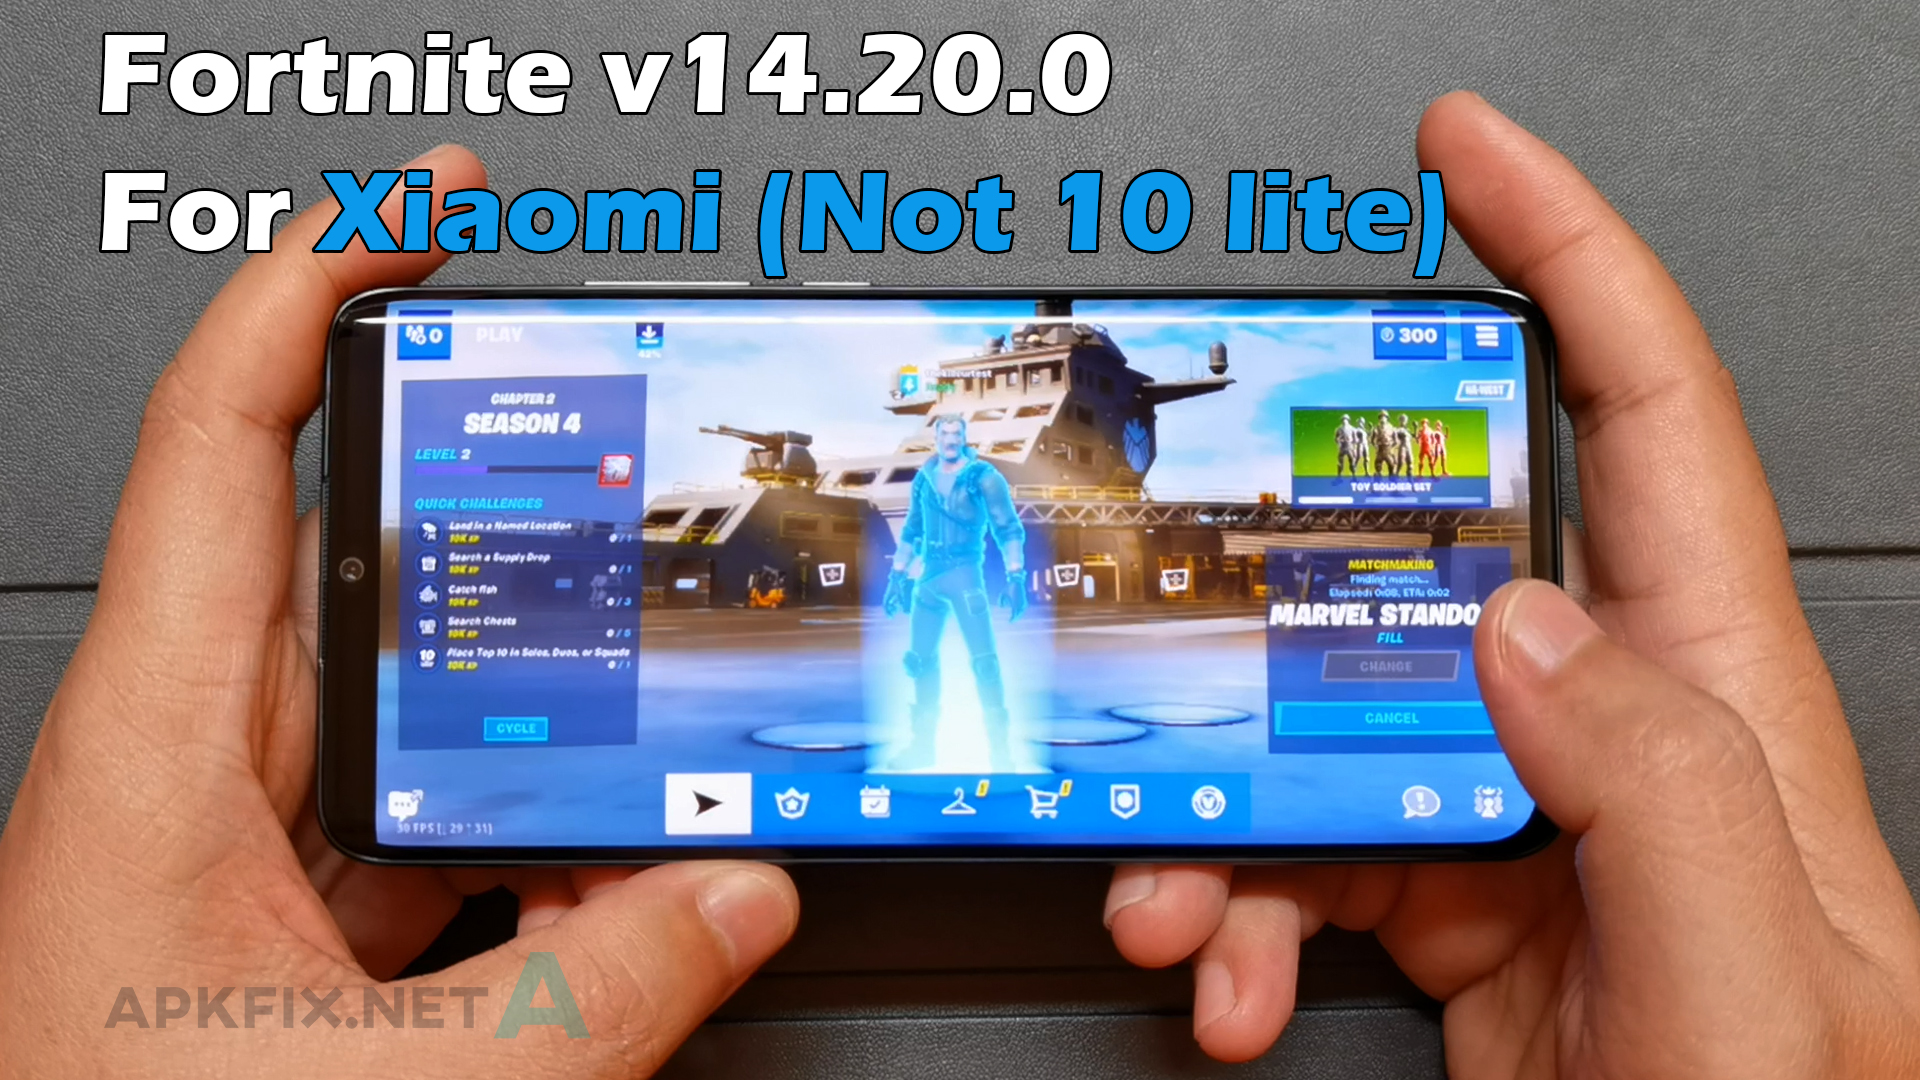 Fortnite v14 .20.0 for Xiaomi fix not supported (Note 10 ... - 1920 x 1080 jpeg 1163kB